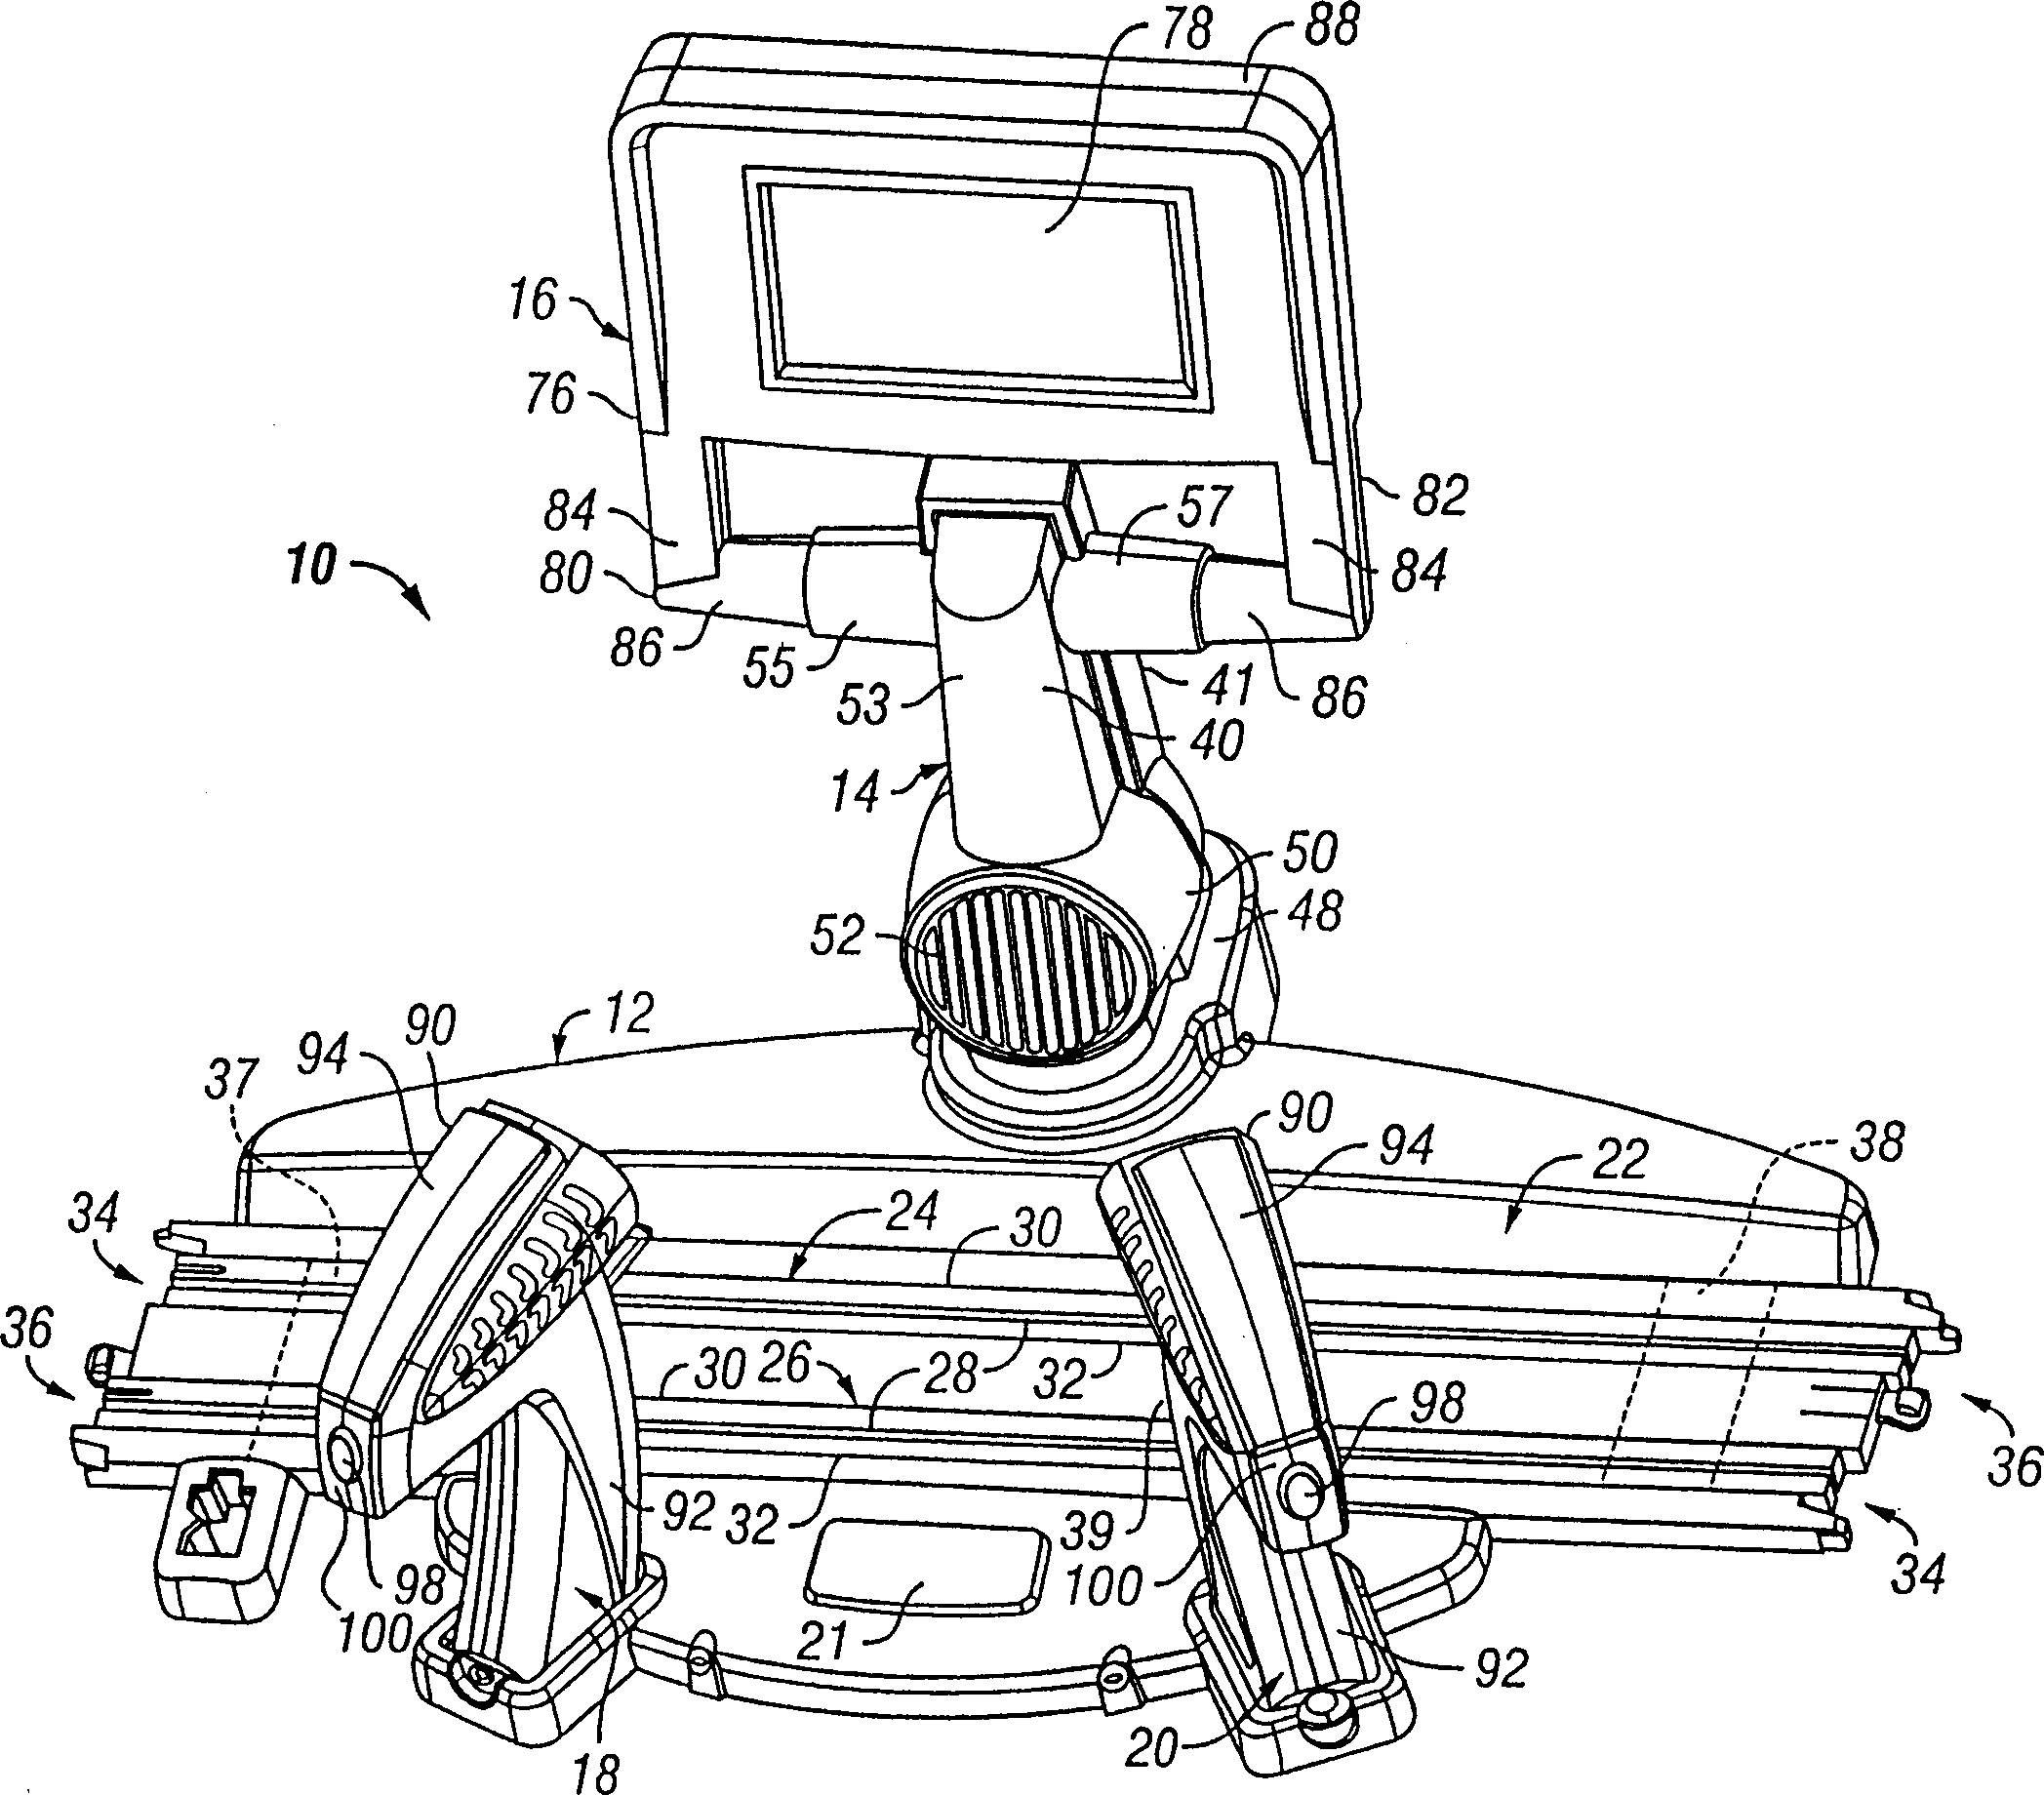 Electrically controlled competitive game system with information and control center